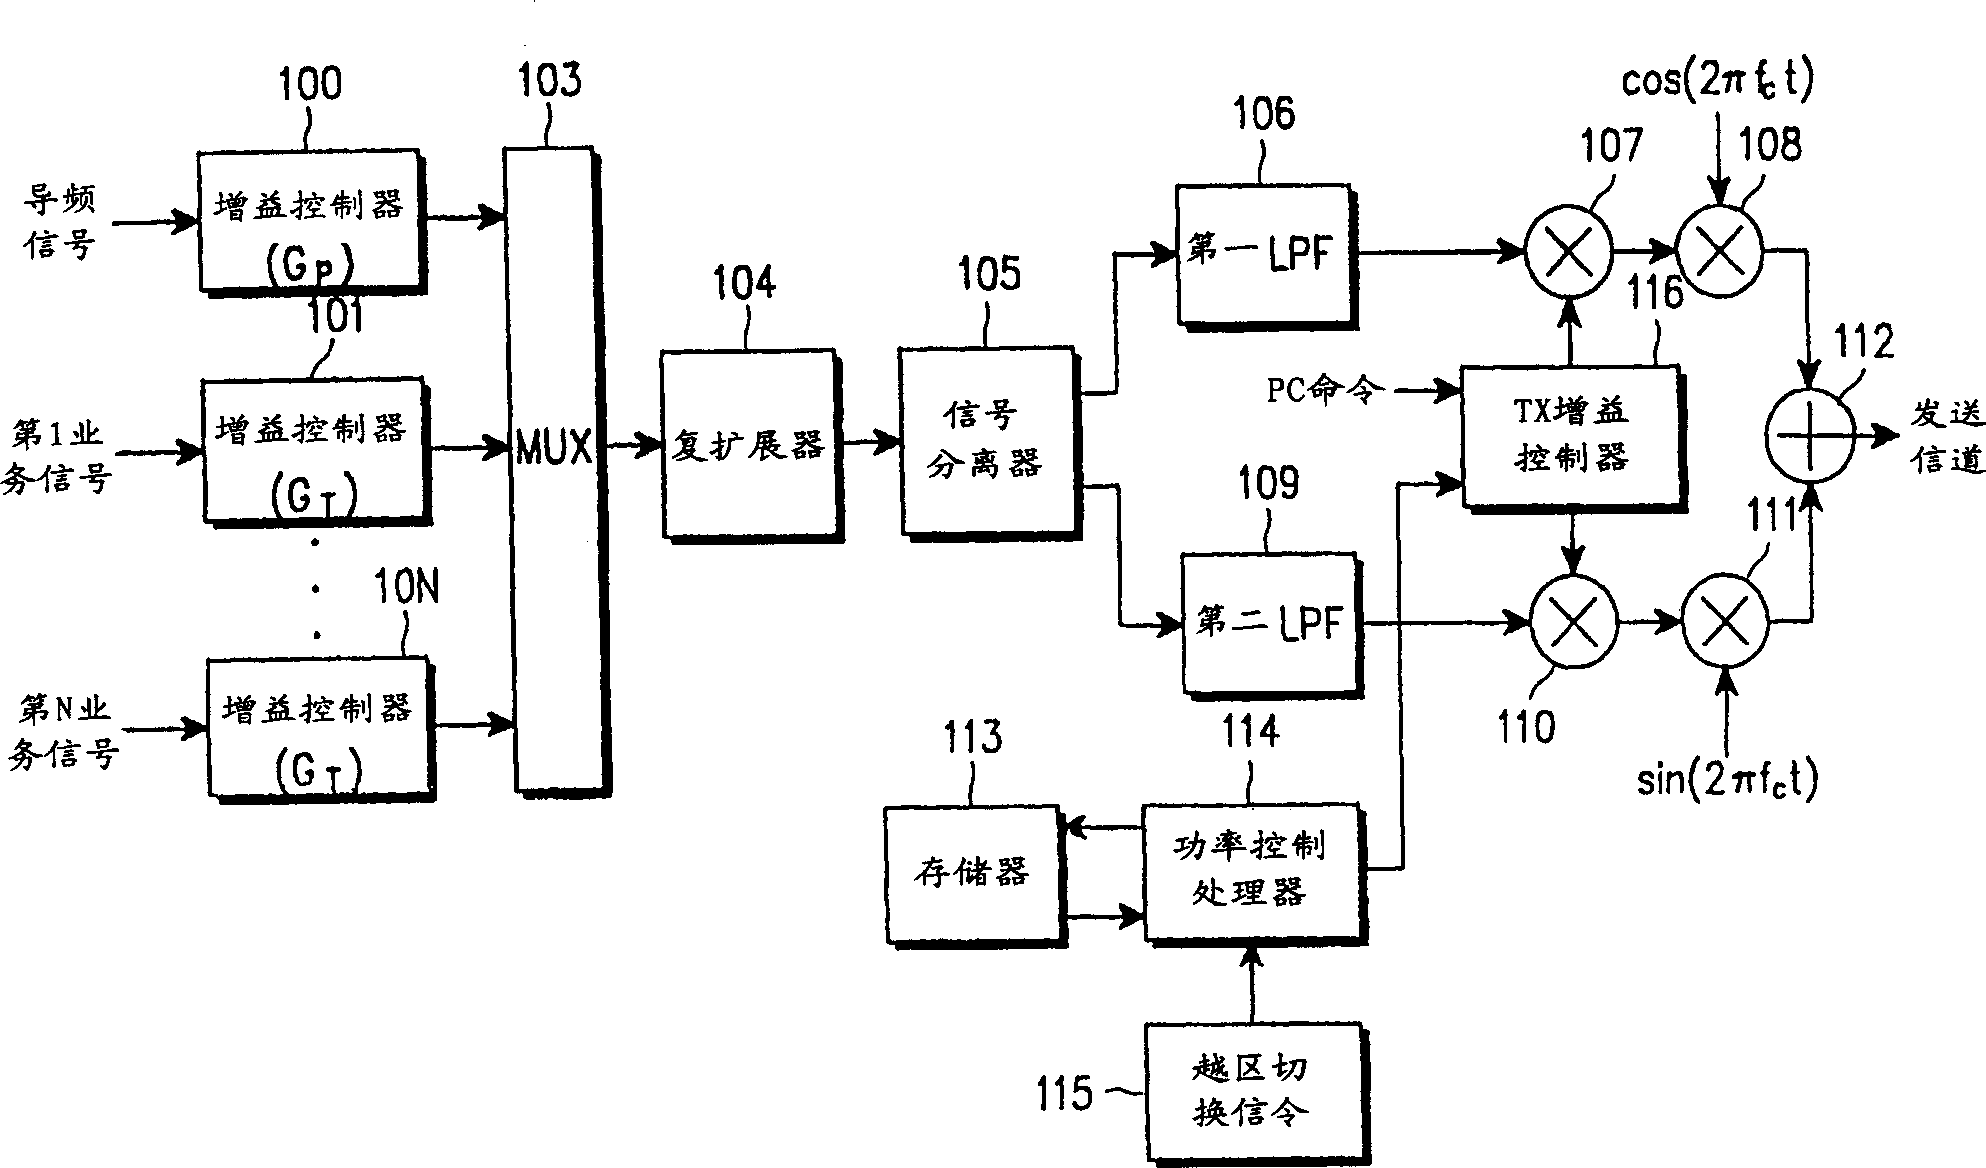 Power control apparatus and method for inter frequency handoff in cdma communication system